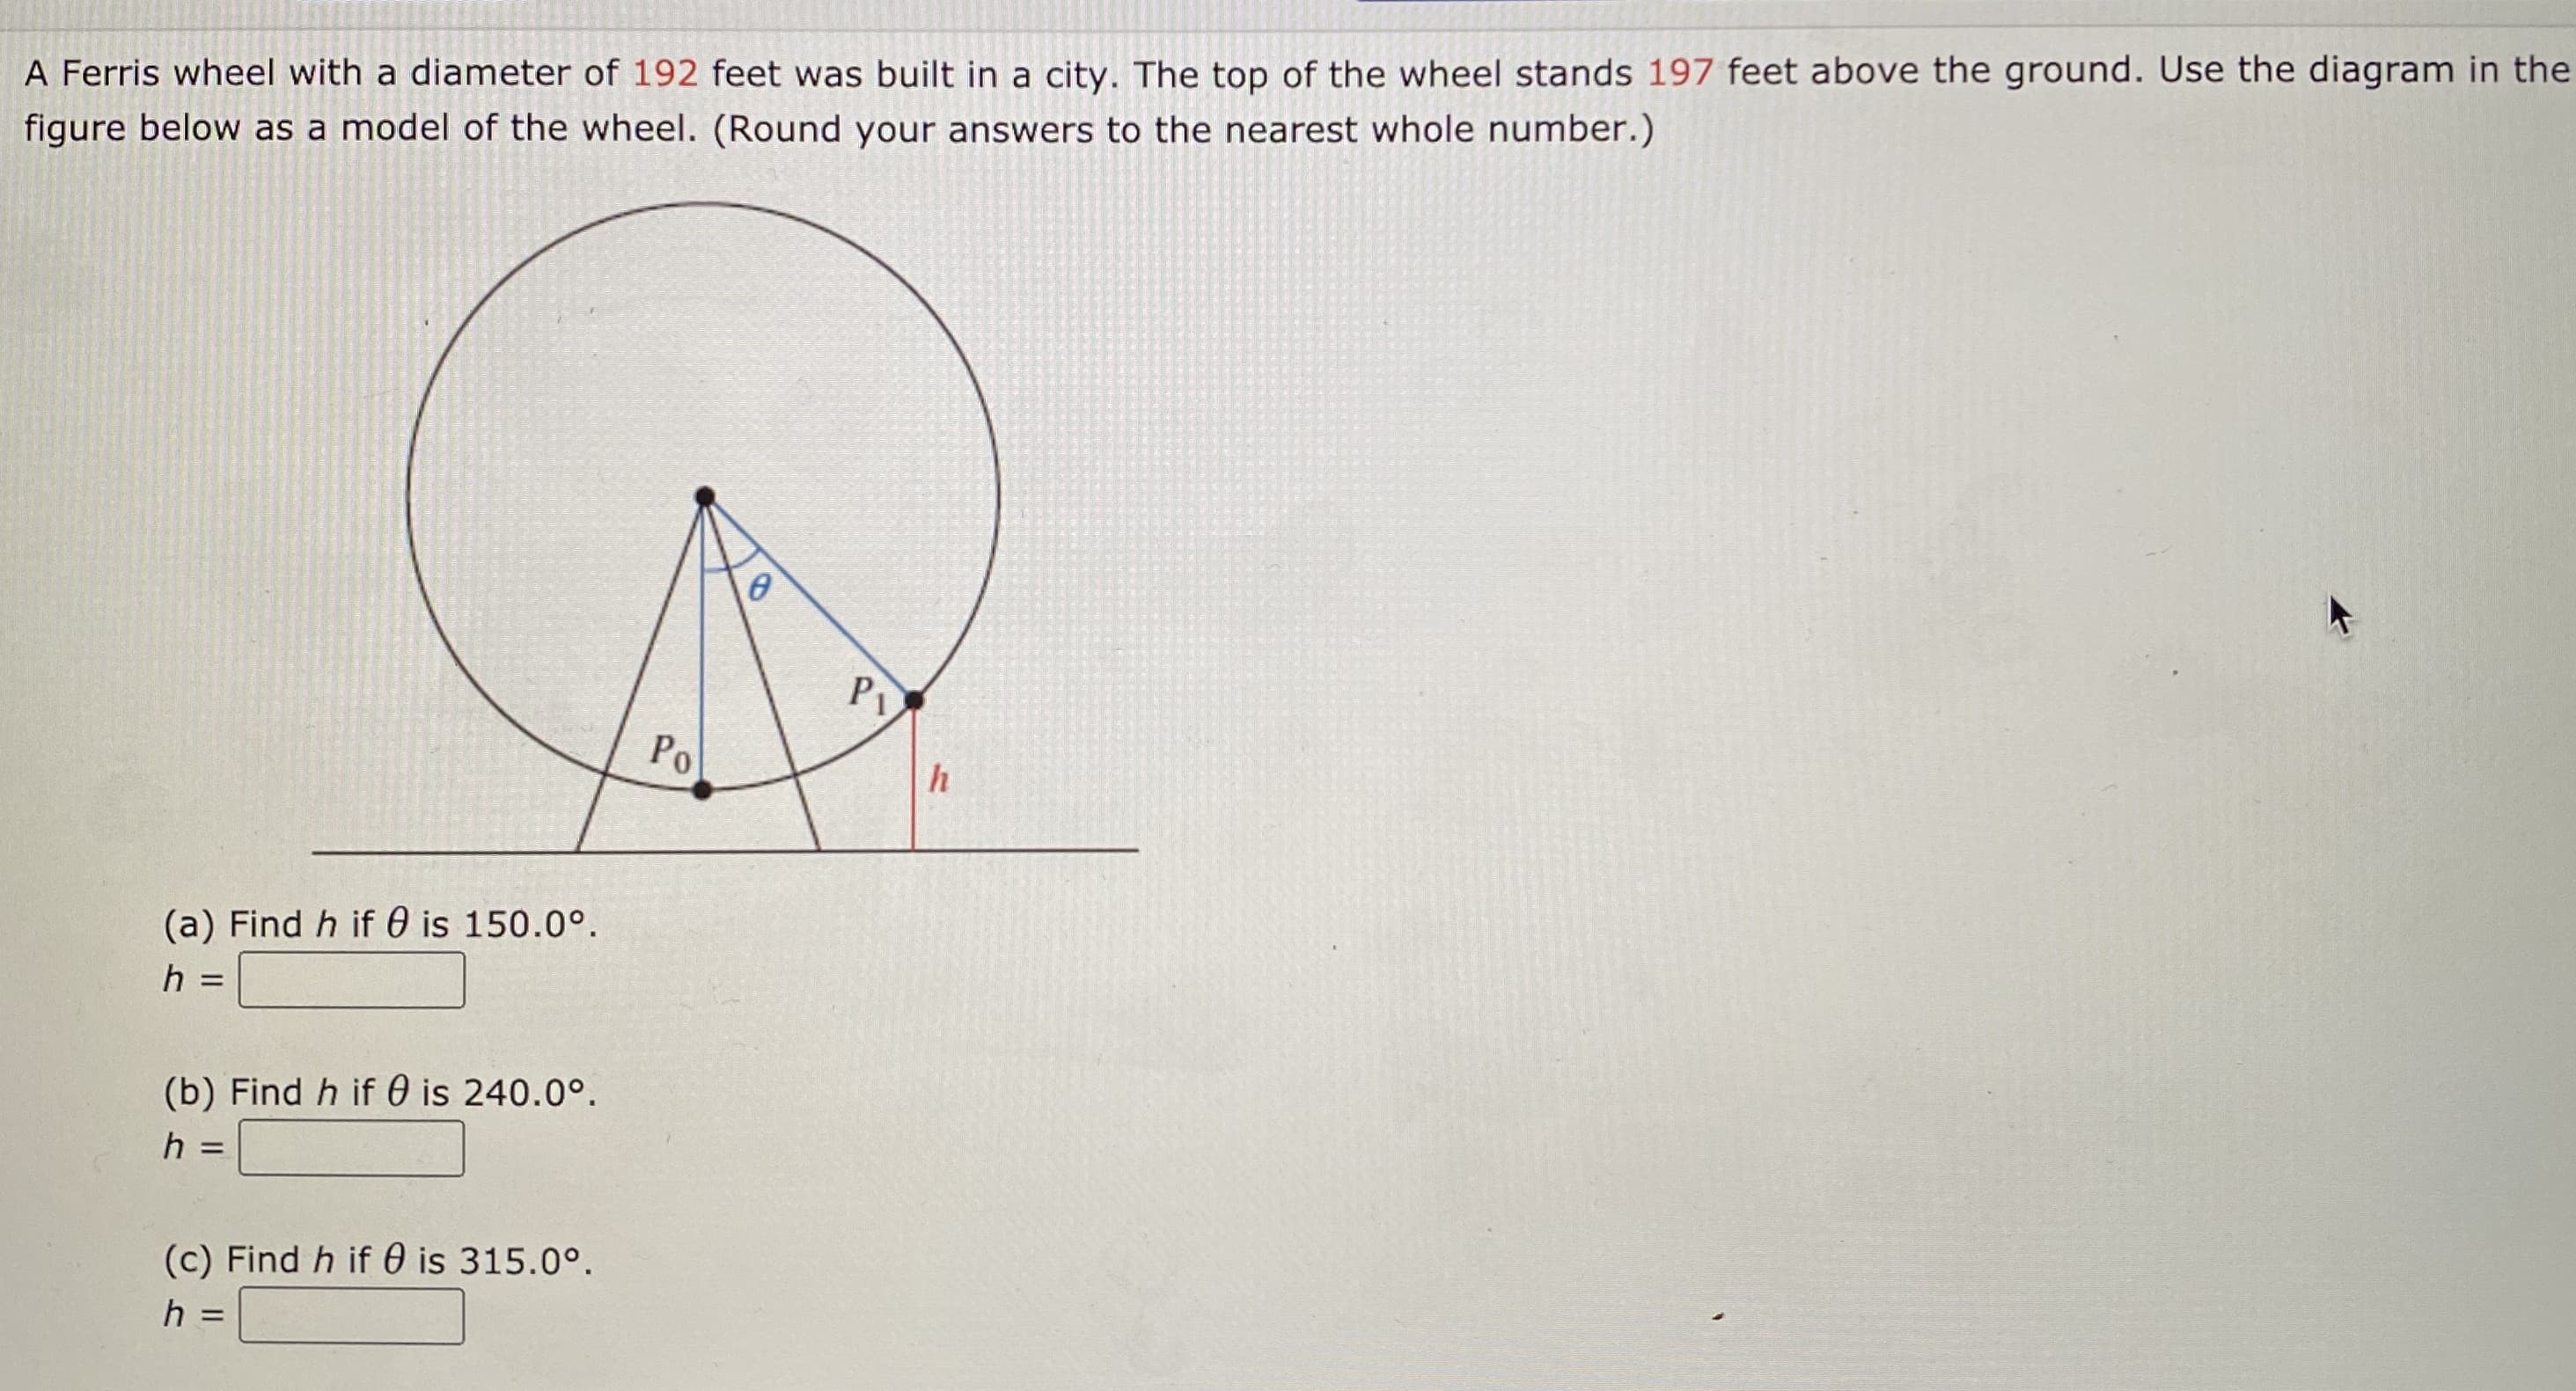 A Ferris wheel with a diameter of 192 feet was built in a city. The top of the wheel stands 197 feet above the ground. Use the diagram in the
figure below as a model of the wheel. (Round your answers to the nearest whole number.)
